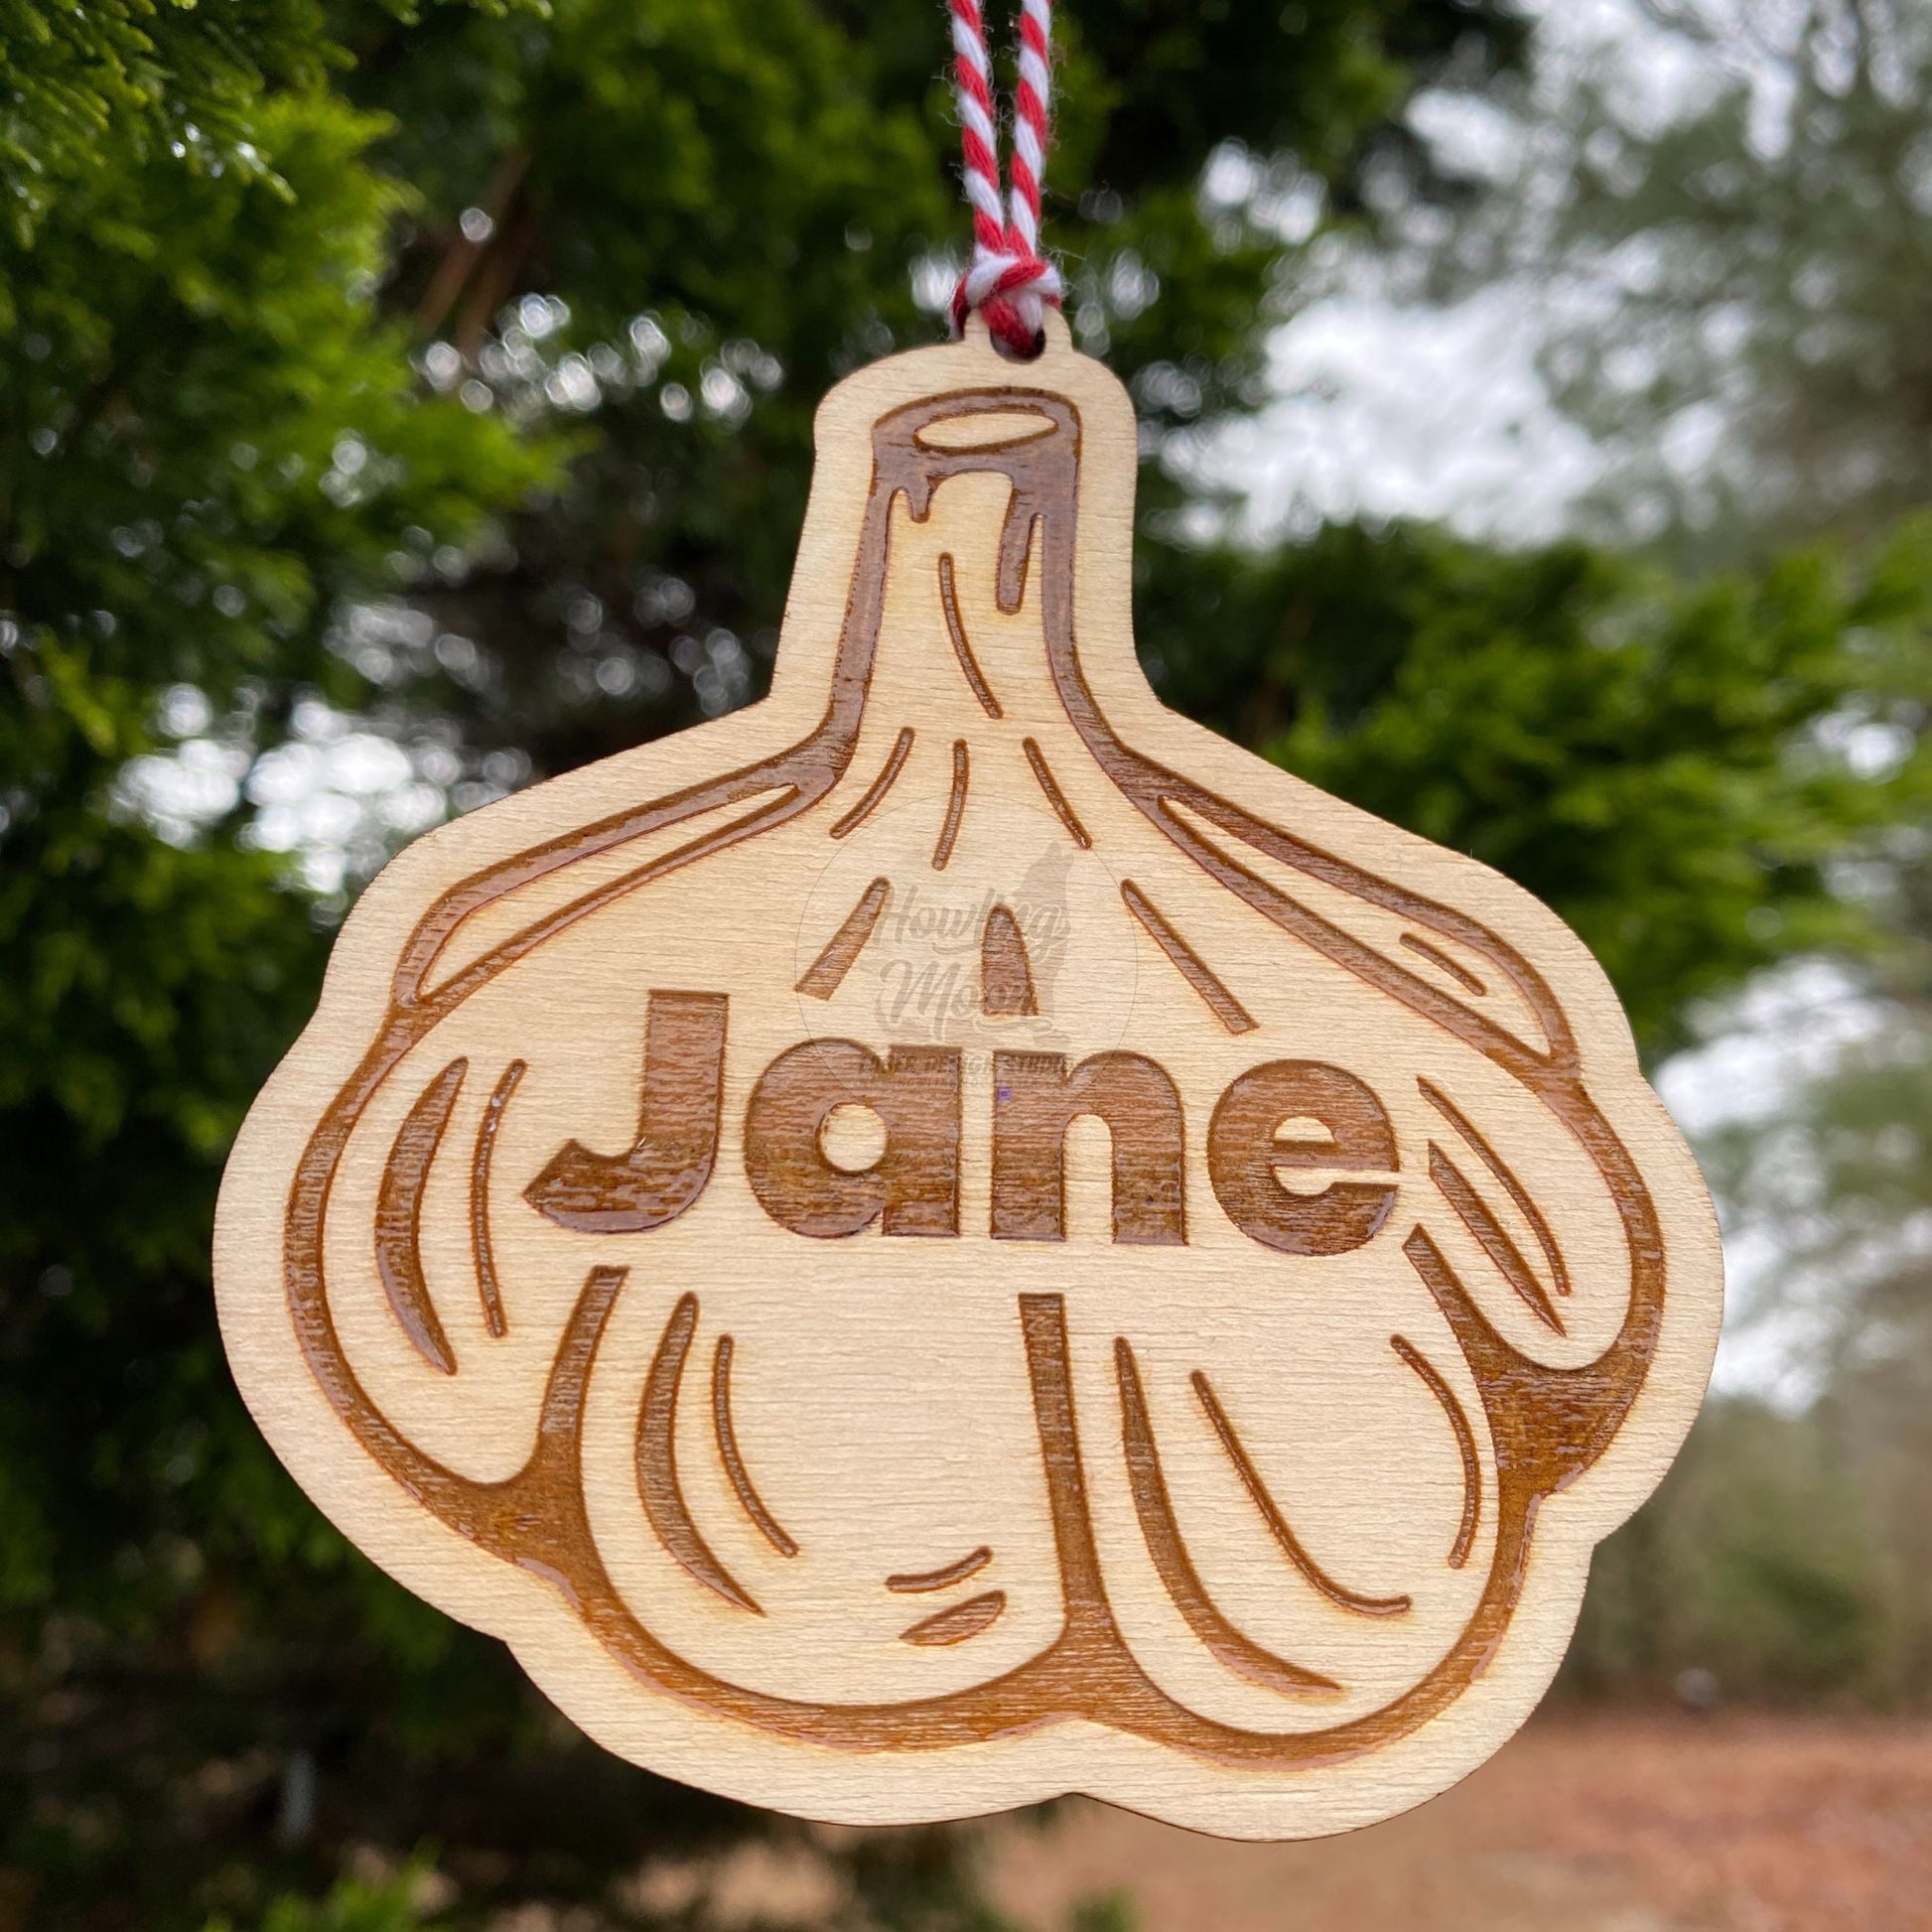 Close up of Personalized garlic ornament hangs from a tree branch with red & white twine. Handcrafted by Howling Moon Laser Design Studio in Virginia, USA